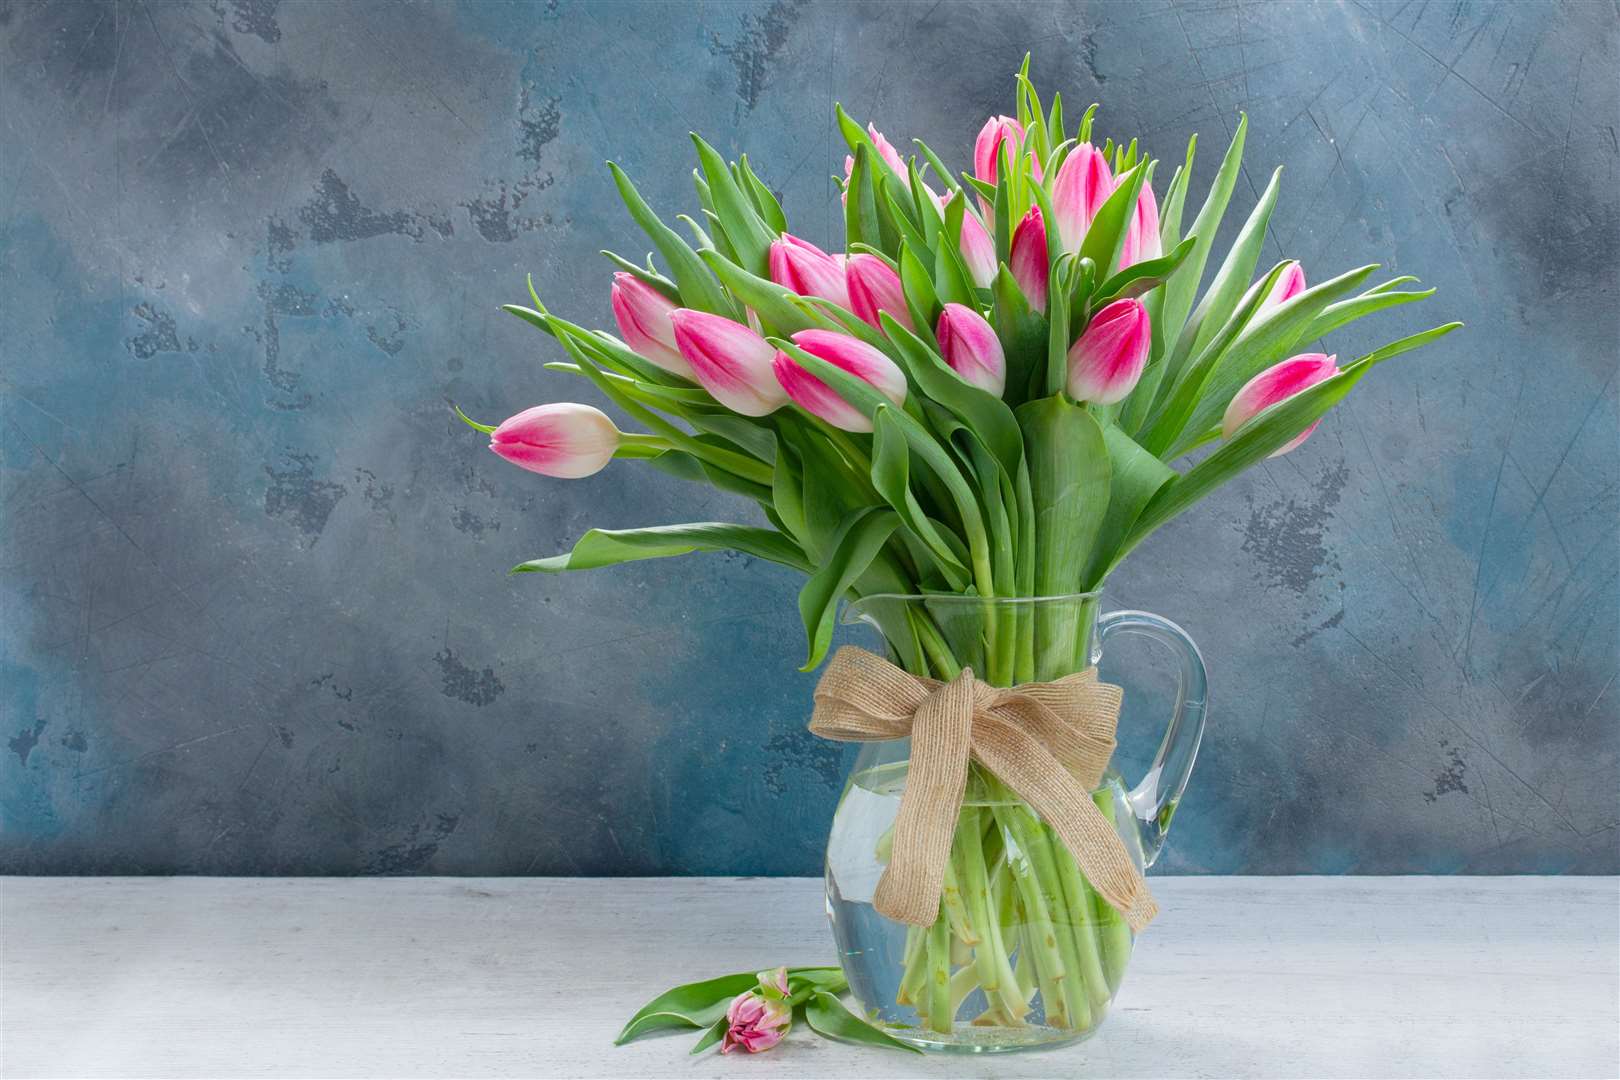 Send your loved ones some beautiful Easter flowers to brighten up their weekend.